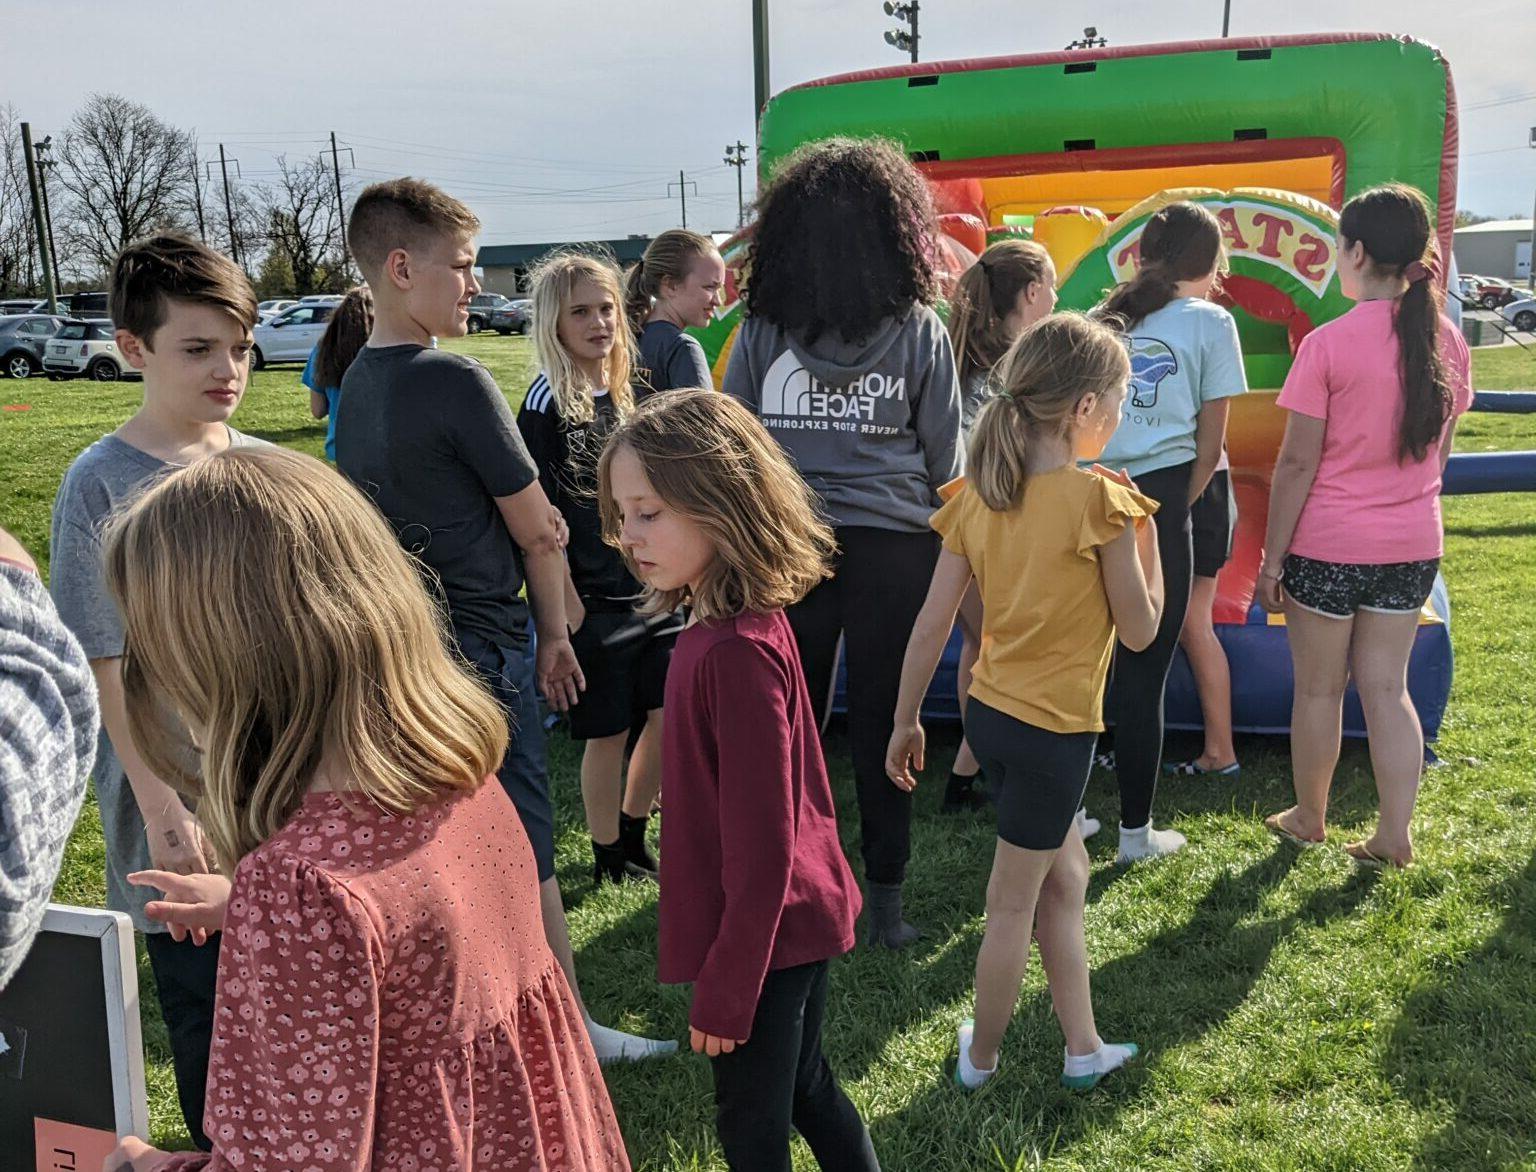 kids in line for bounce house